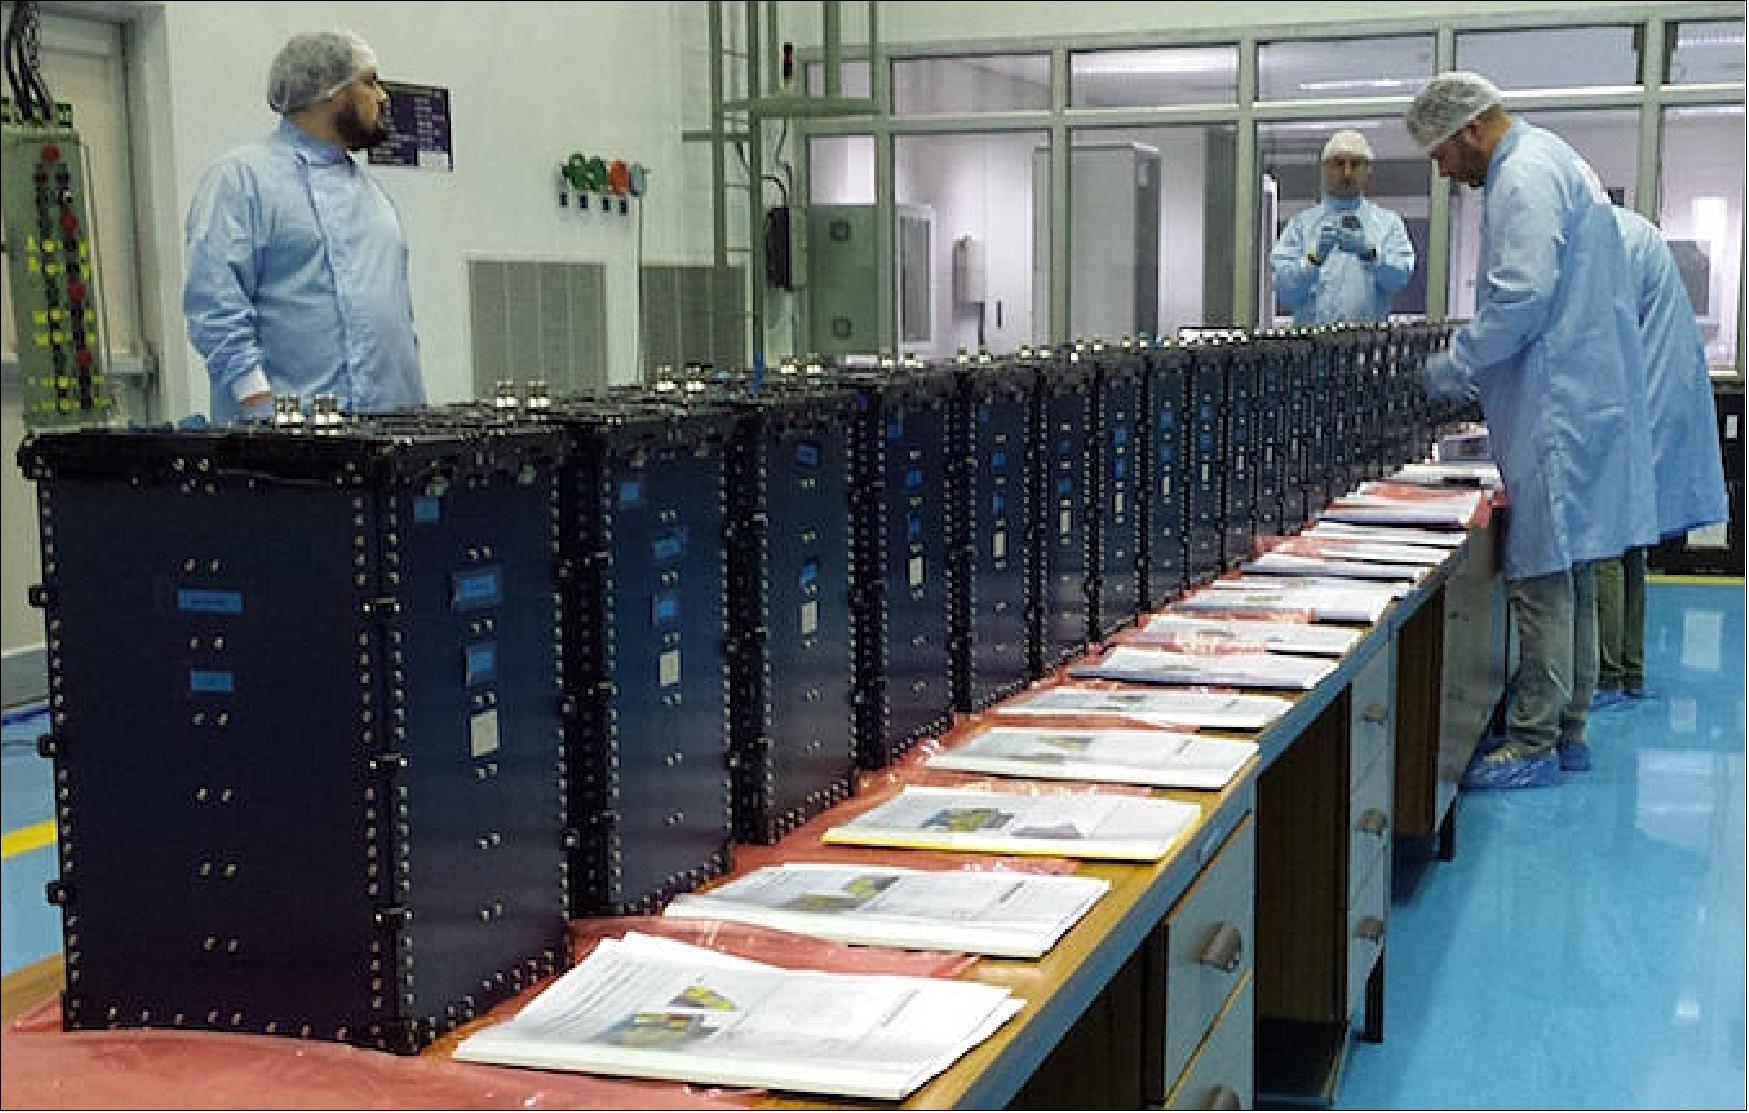 Figure 36: A view of the 25 “QuadPacks” holding 101 CubeSats preparing for launch on the PSLV-C37 mission (image credit: Innovative Solutions in Space)